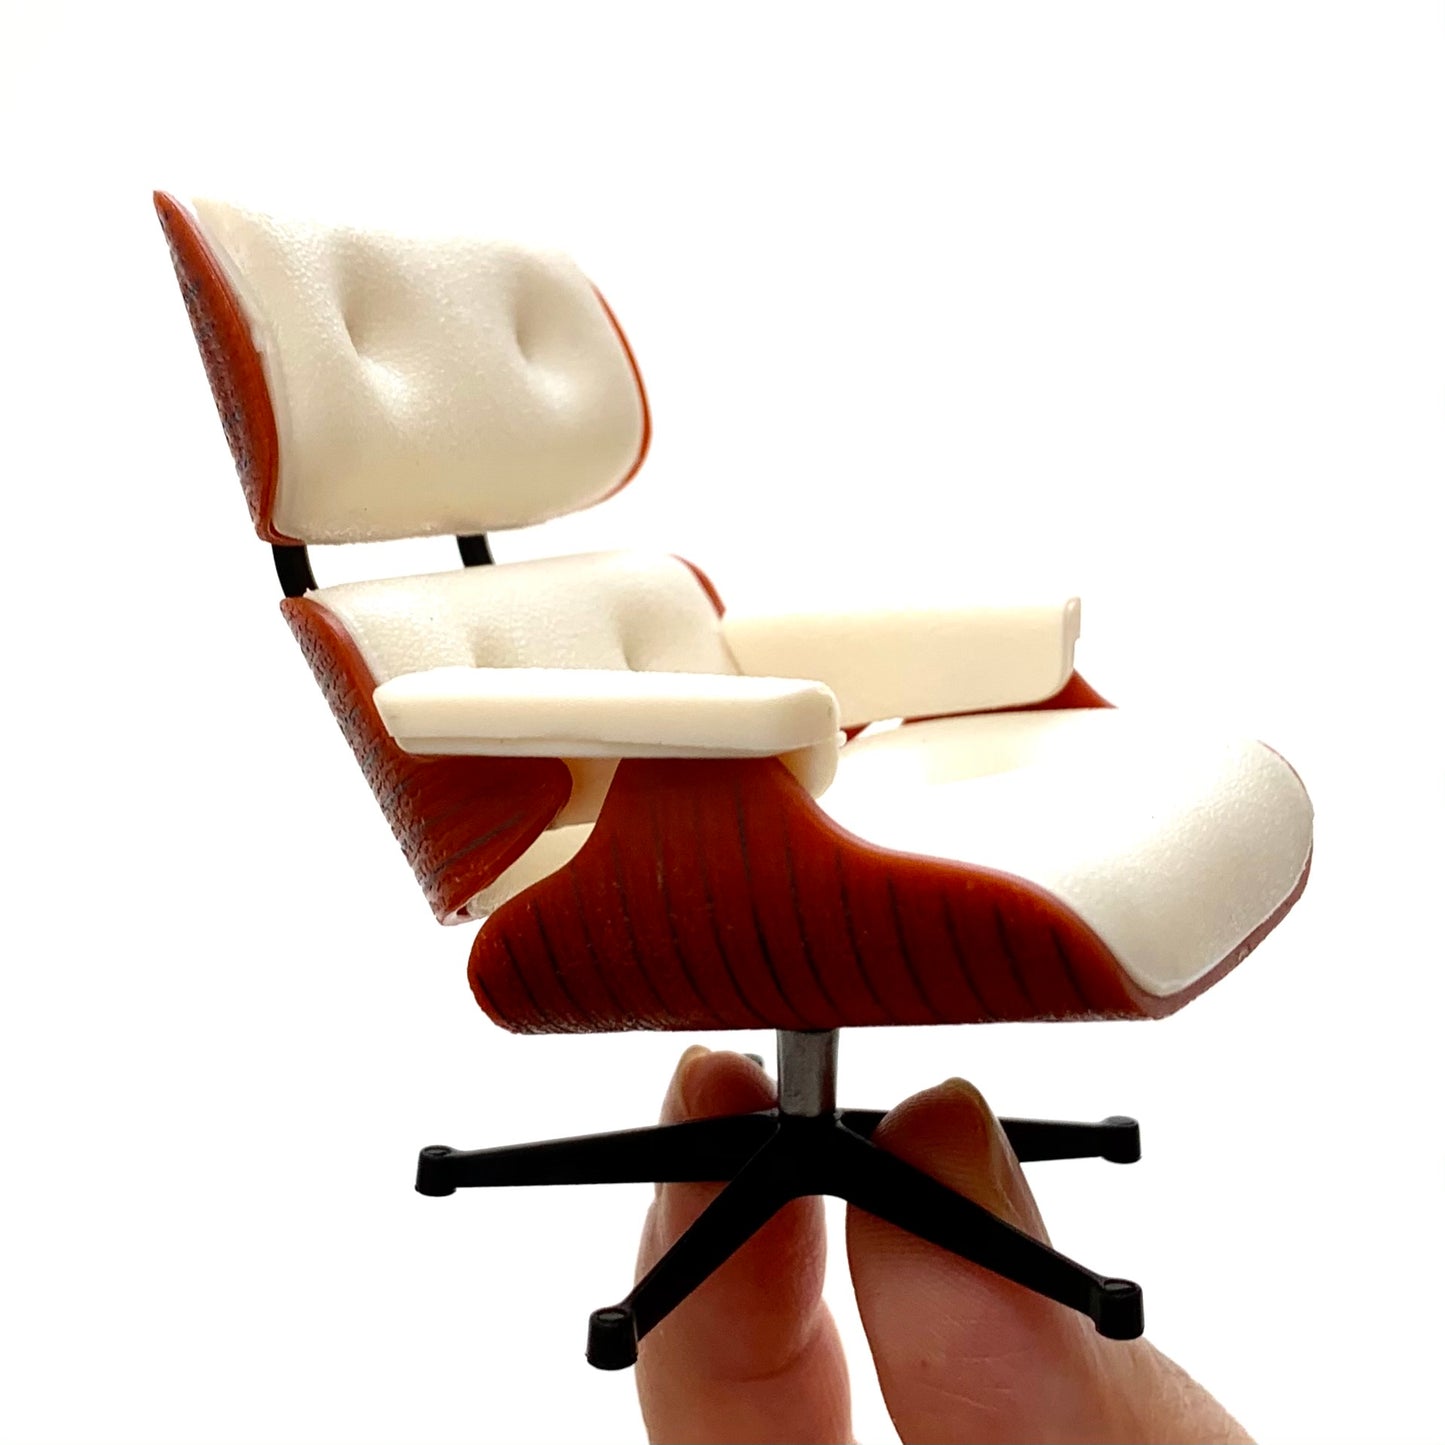 X 75119 Lounge Chair-No Ottoman-White-DISCONTINUED